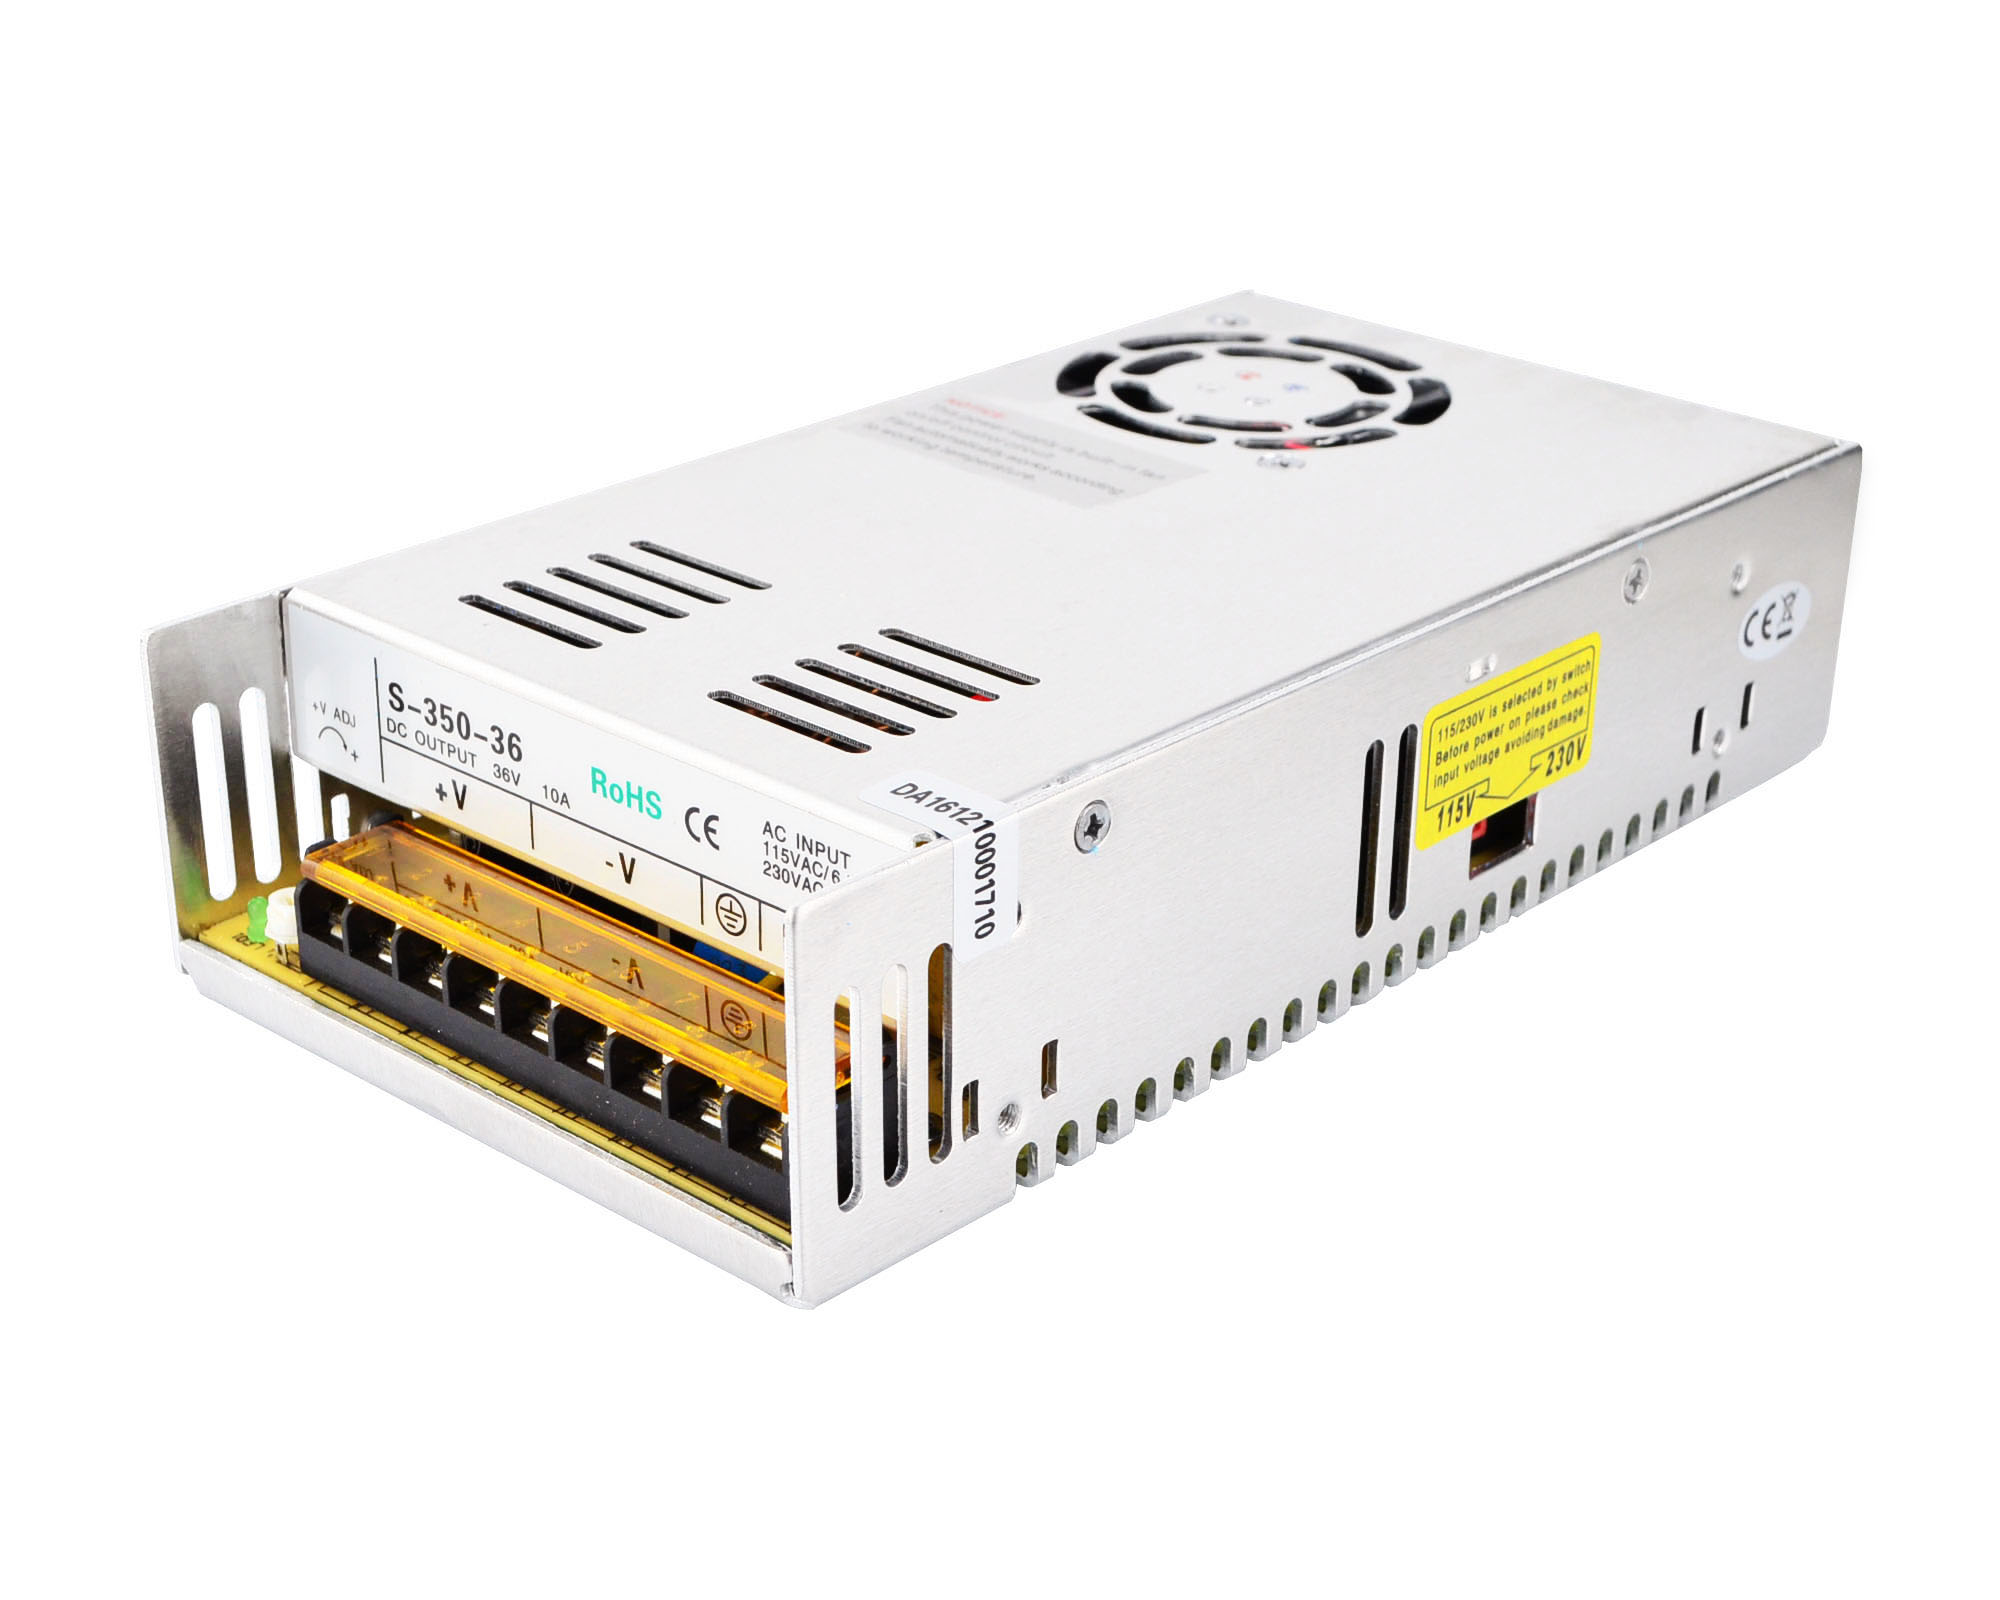 1 pc Single Output Switching Power Supply 350W 36V S-350-36 0-9.8A for CNC Router,Engraving